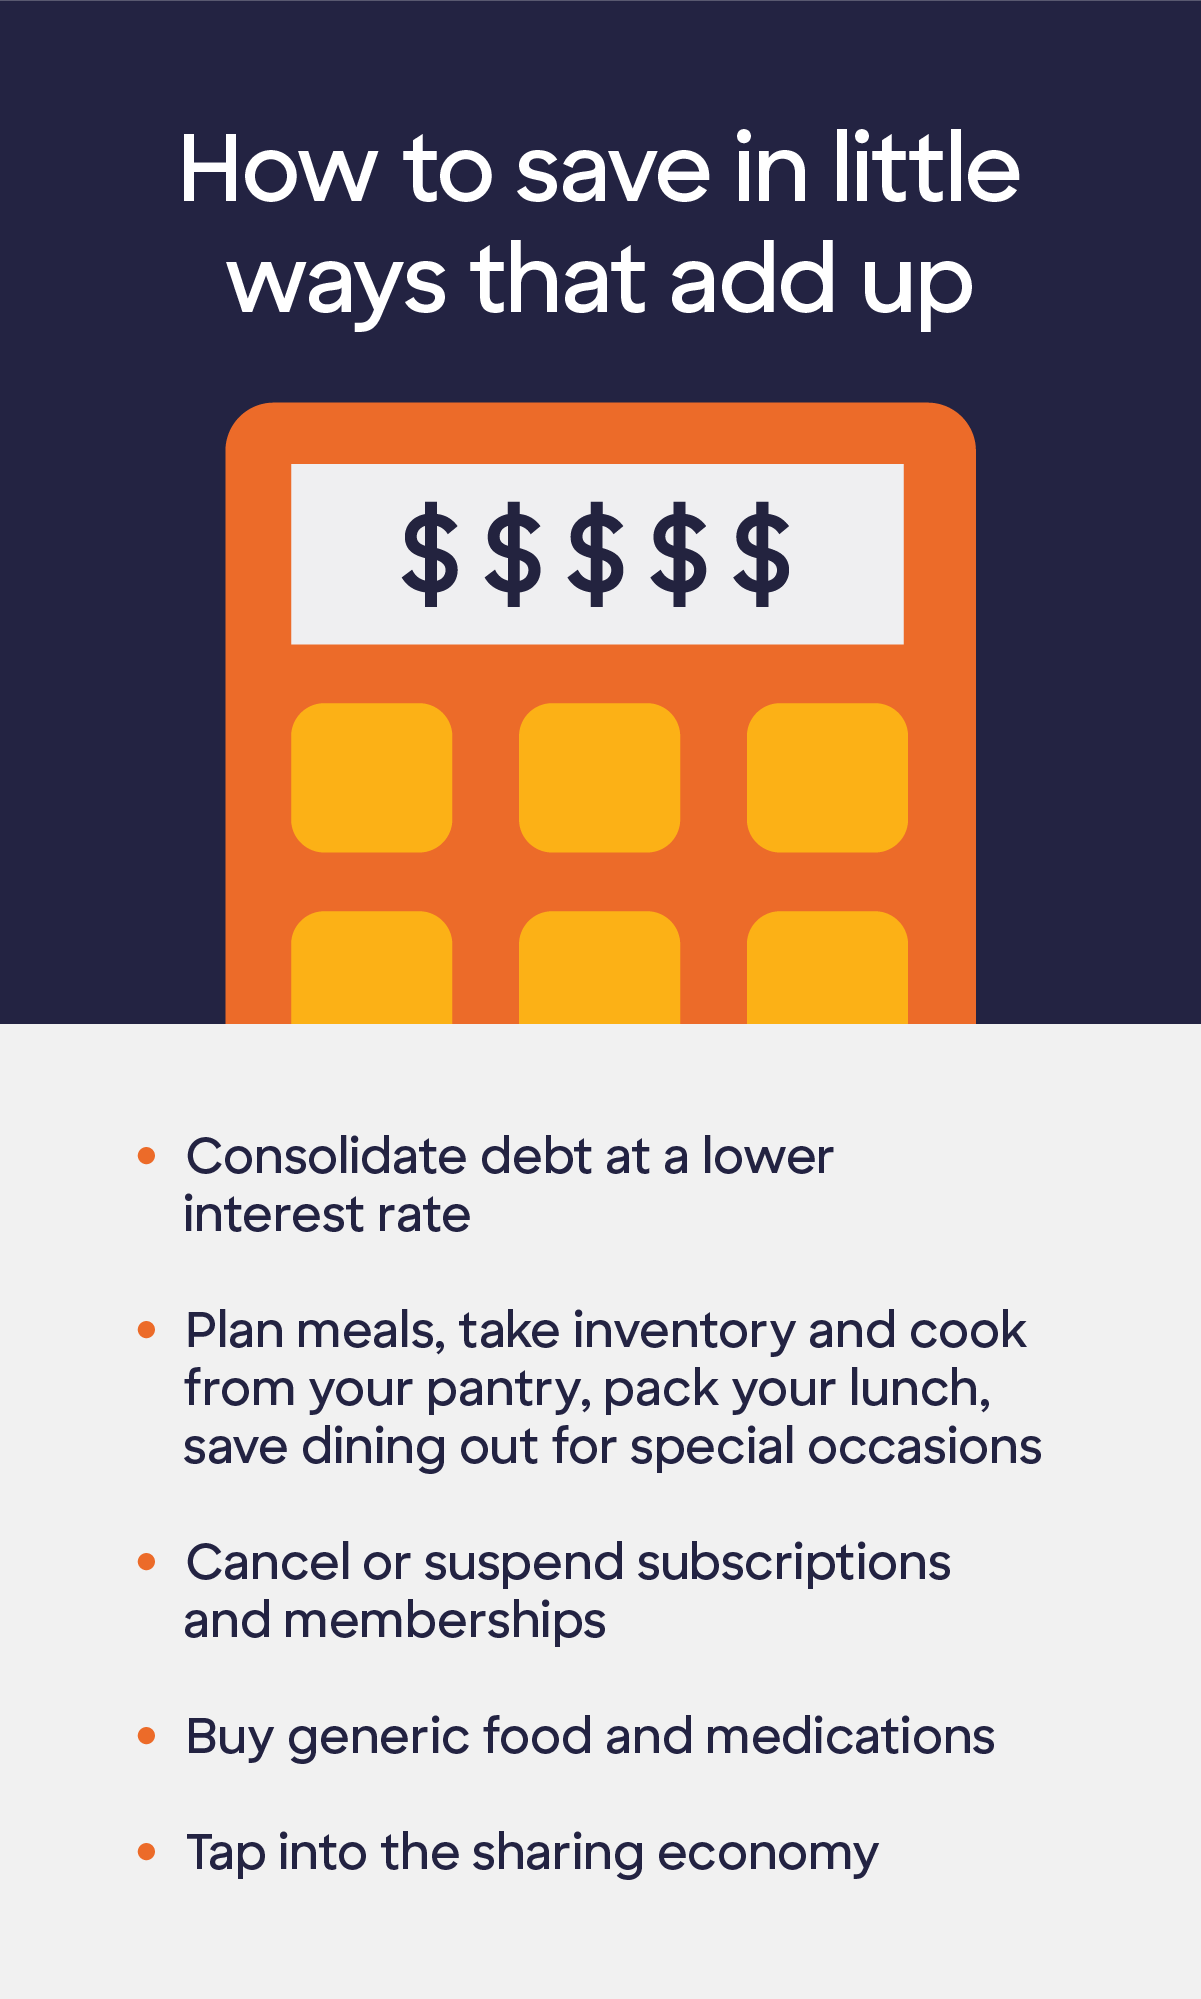 Graphic listing suggestions for ways to save that add up, such as: Consolidate debt at a lower rate, plan meals, take inventory and cook from your pantry, pack your lunch, save dining out for special occasions, cancel, or suspend subscriptions and memberships, buy generic food and medications, tap into the sharing economy.